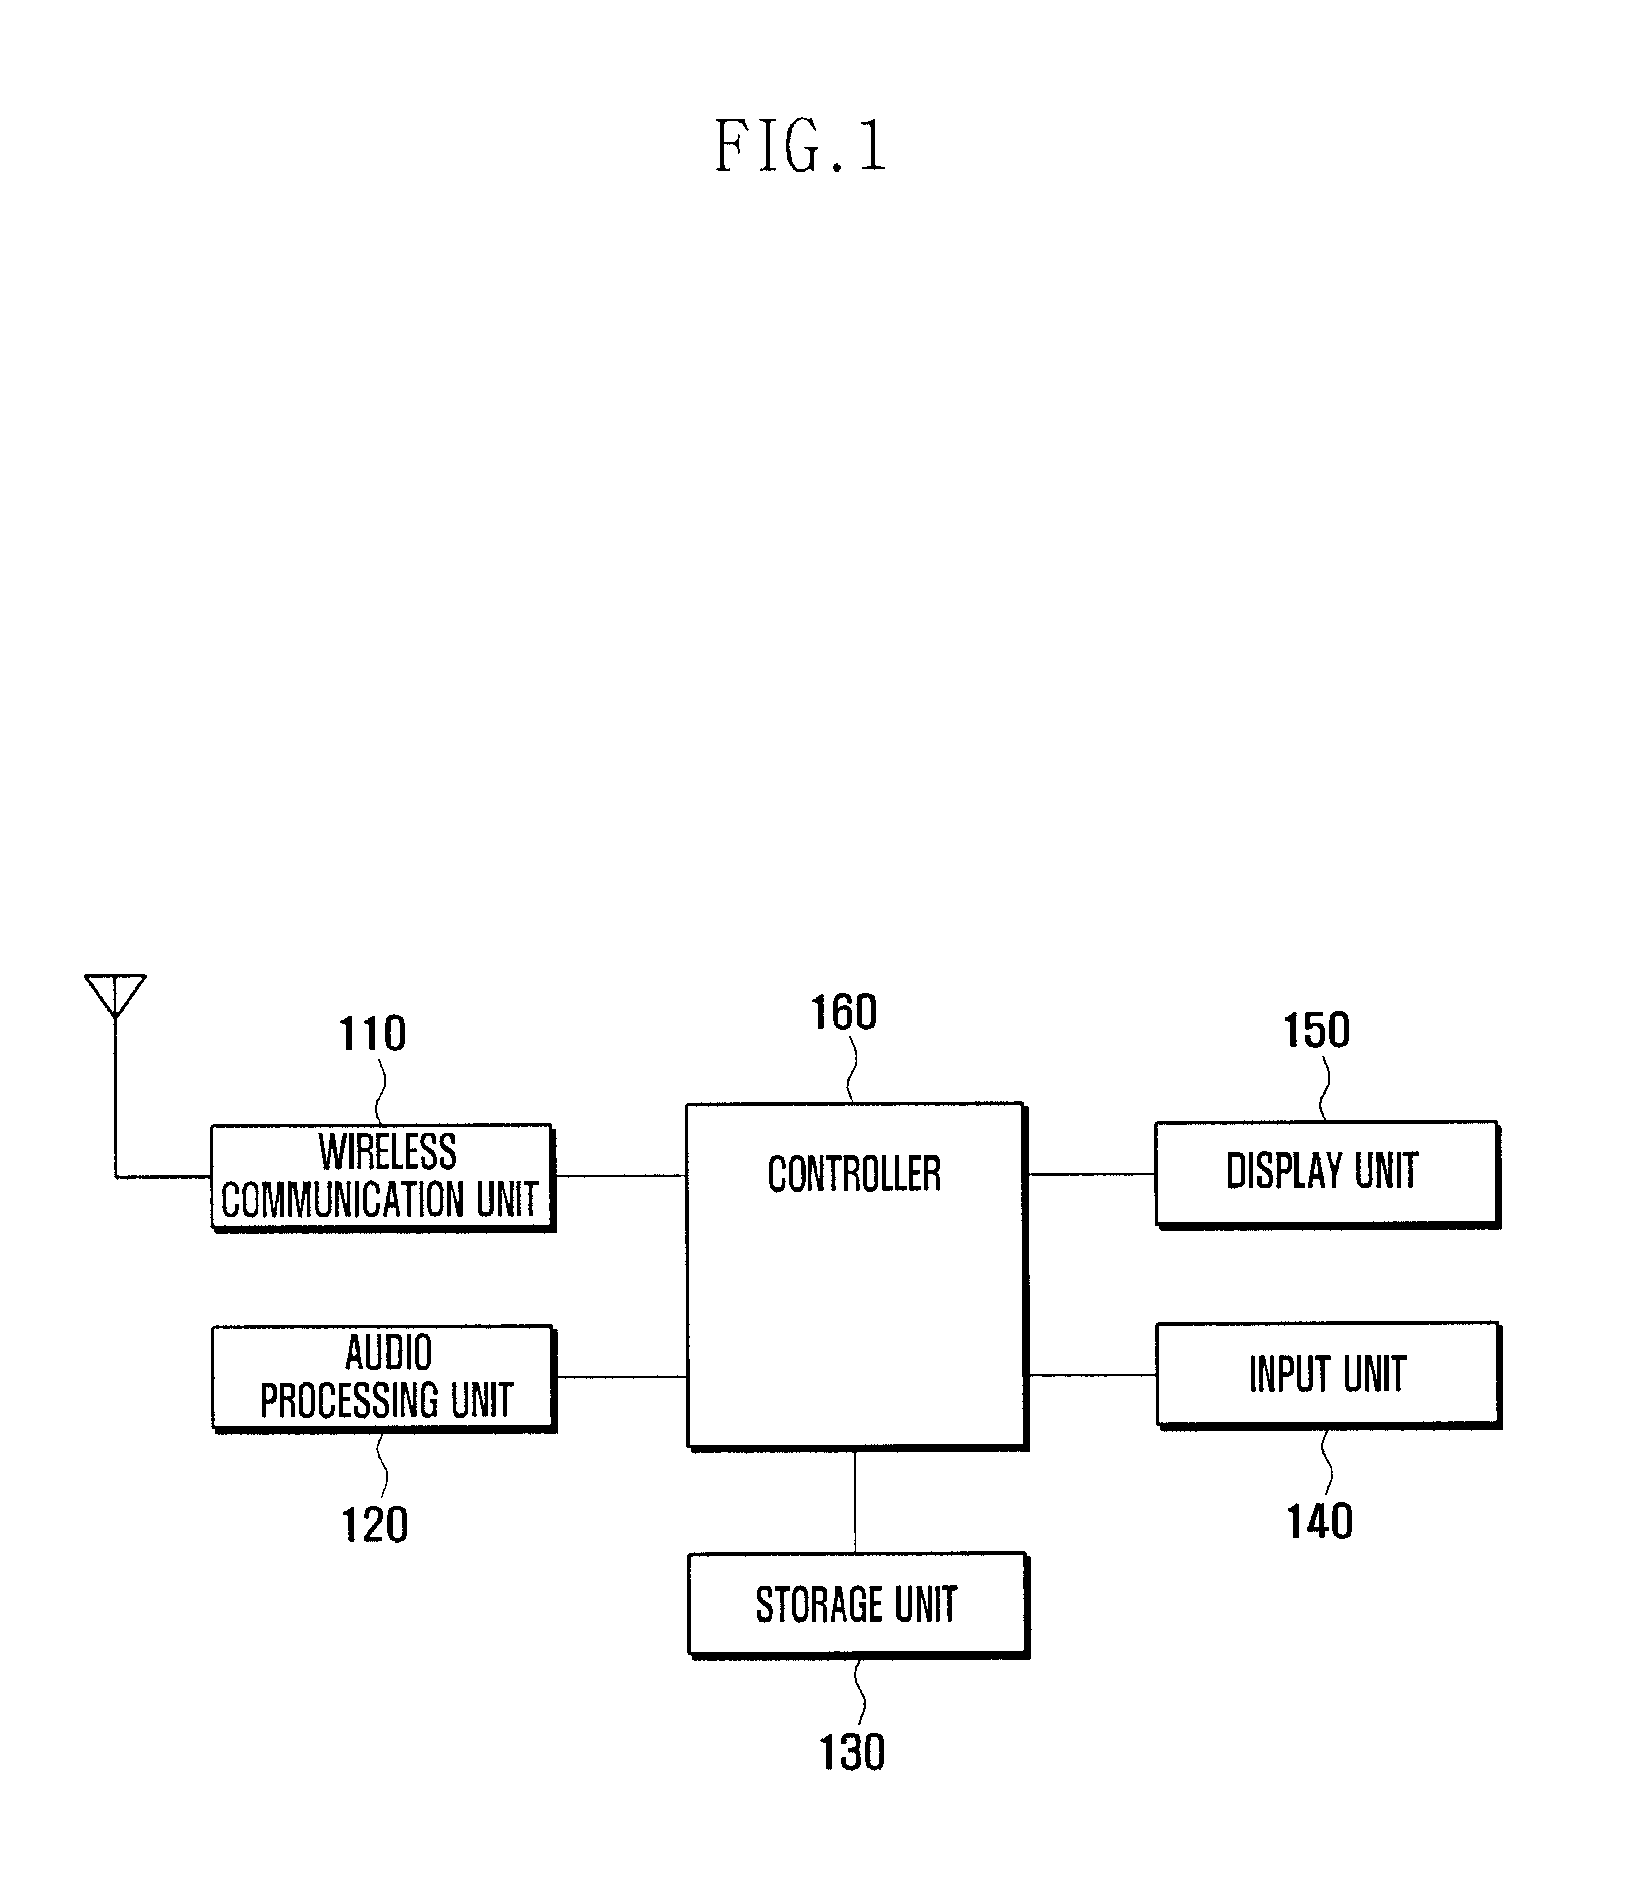 Method and apparatus of selecting an item